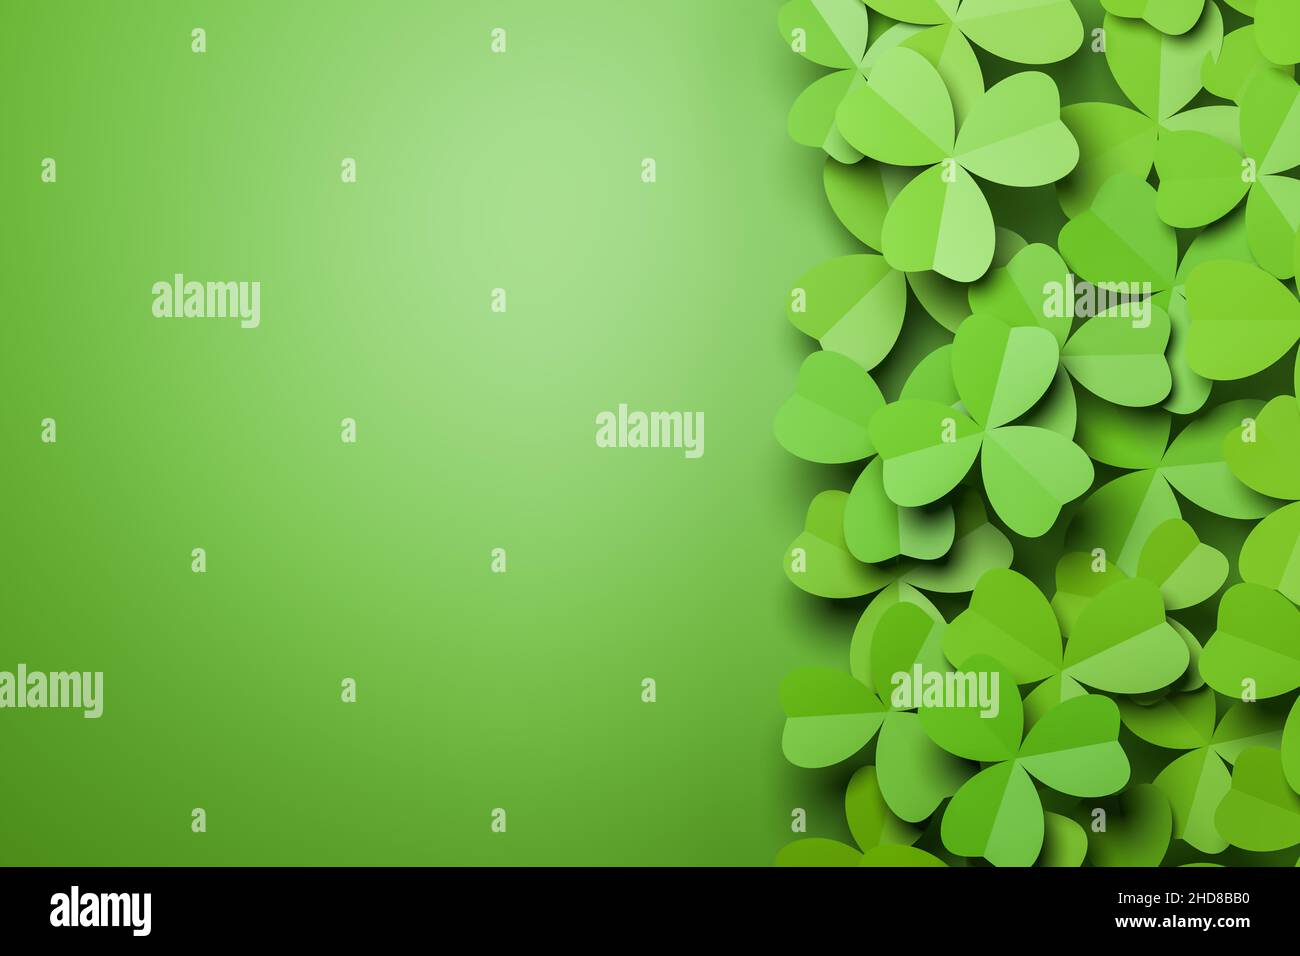 Cloverleaf background with an empty spot for own text to the left. Spring or St. Patrick's Day concept. Stock Photo